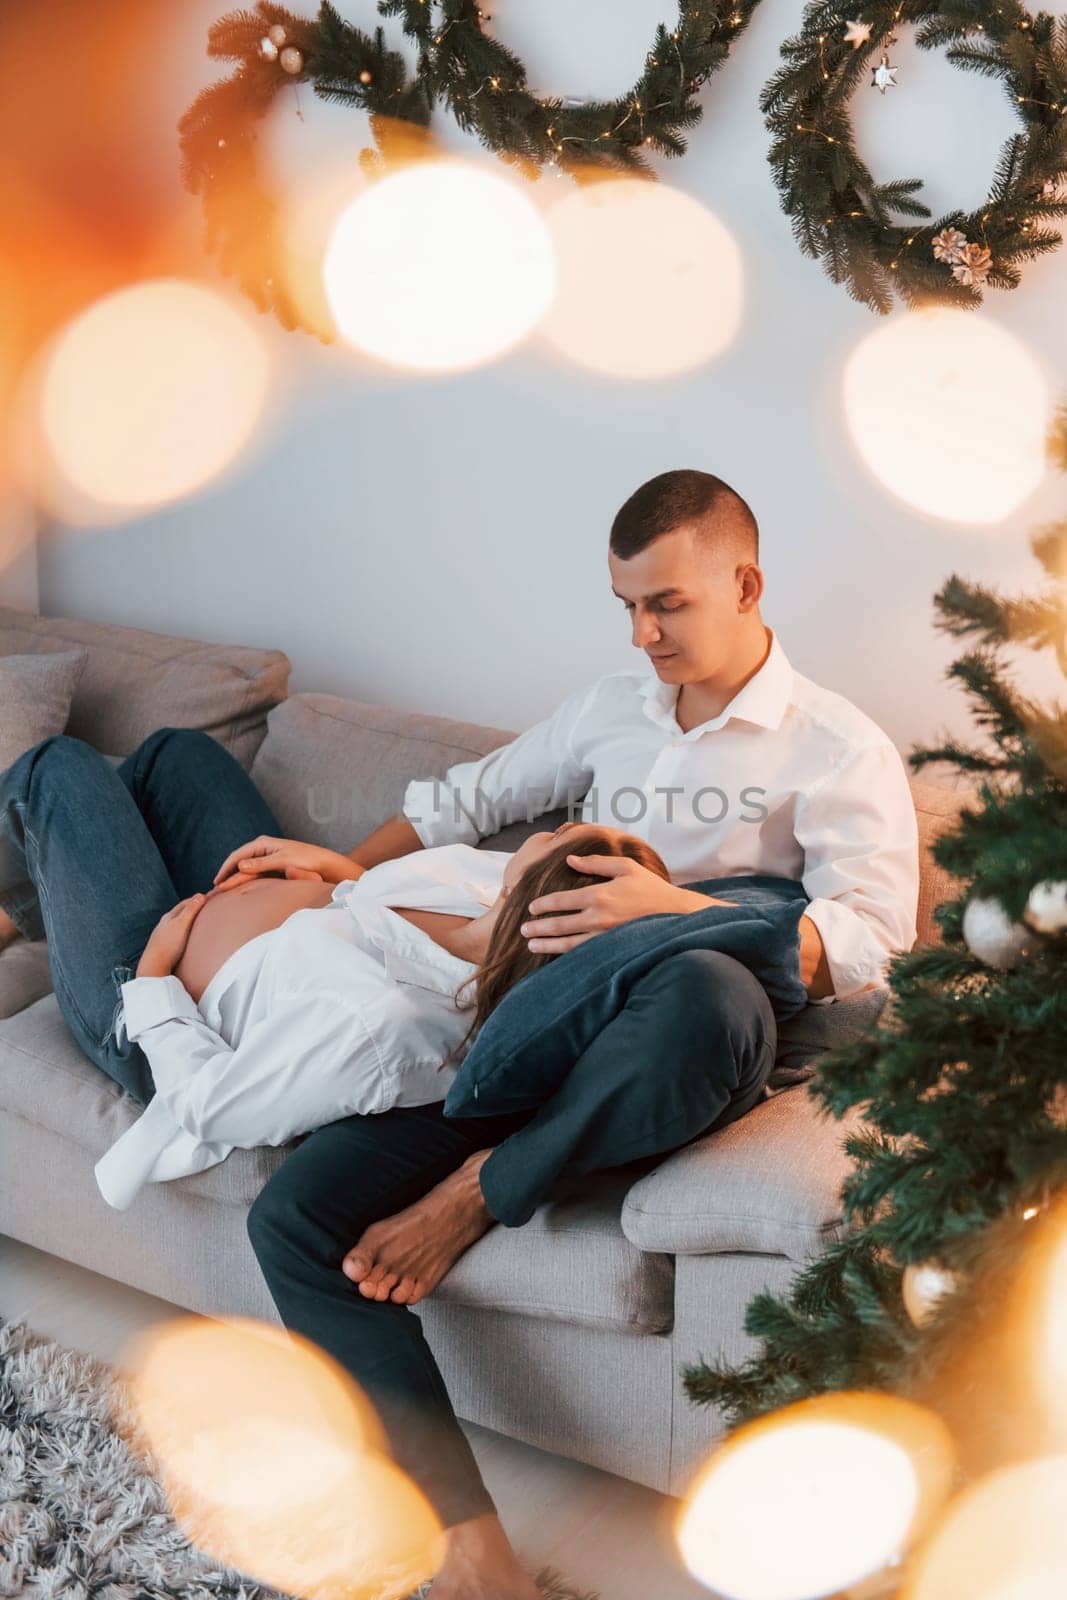 Woman is pregnant. Lovely couple celebrating holidays together indoors.